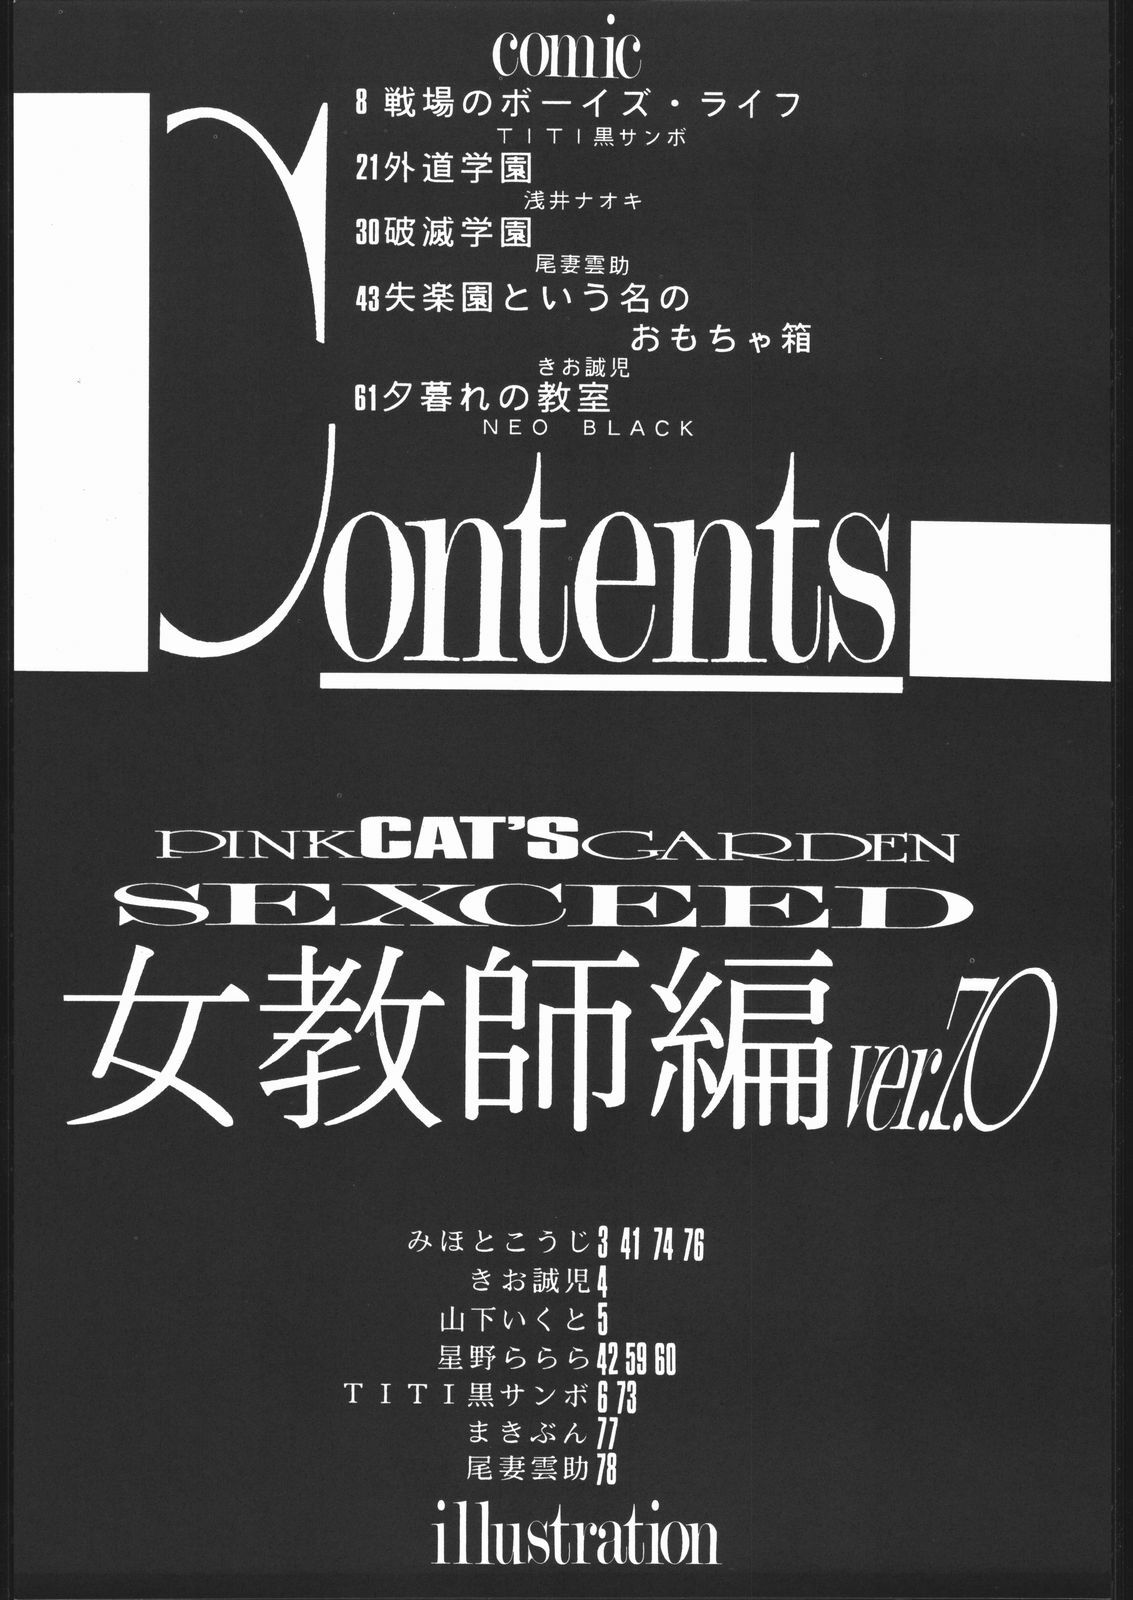 (C50) [PINK CAT'S GARDEN (Various)] SEXCEED ver. 7.0 onnakyoushihen page 6 full